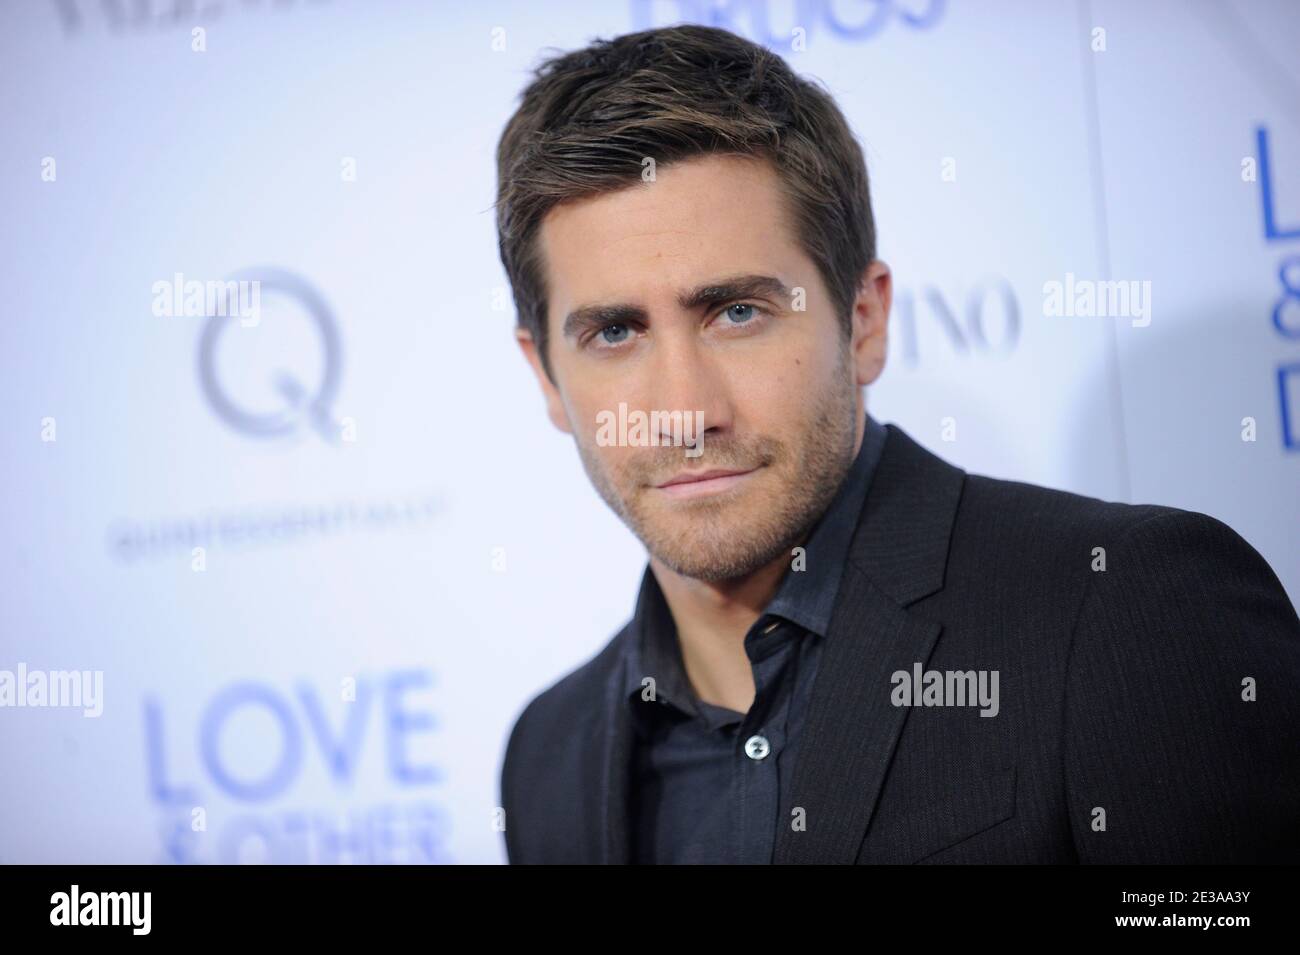 Jake Gyllenhaal attends a screening of 'Love & Other Drugs' at DGA Theater in New York City, NY, USA on November 16, 2010. Photo by Mehdi Taamallah/ABACAPRESS.COM Stock Photo